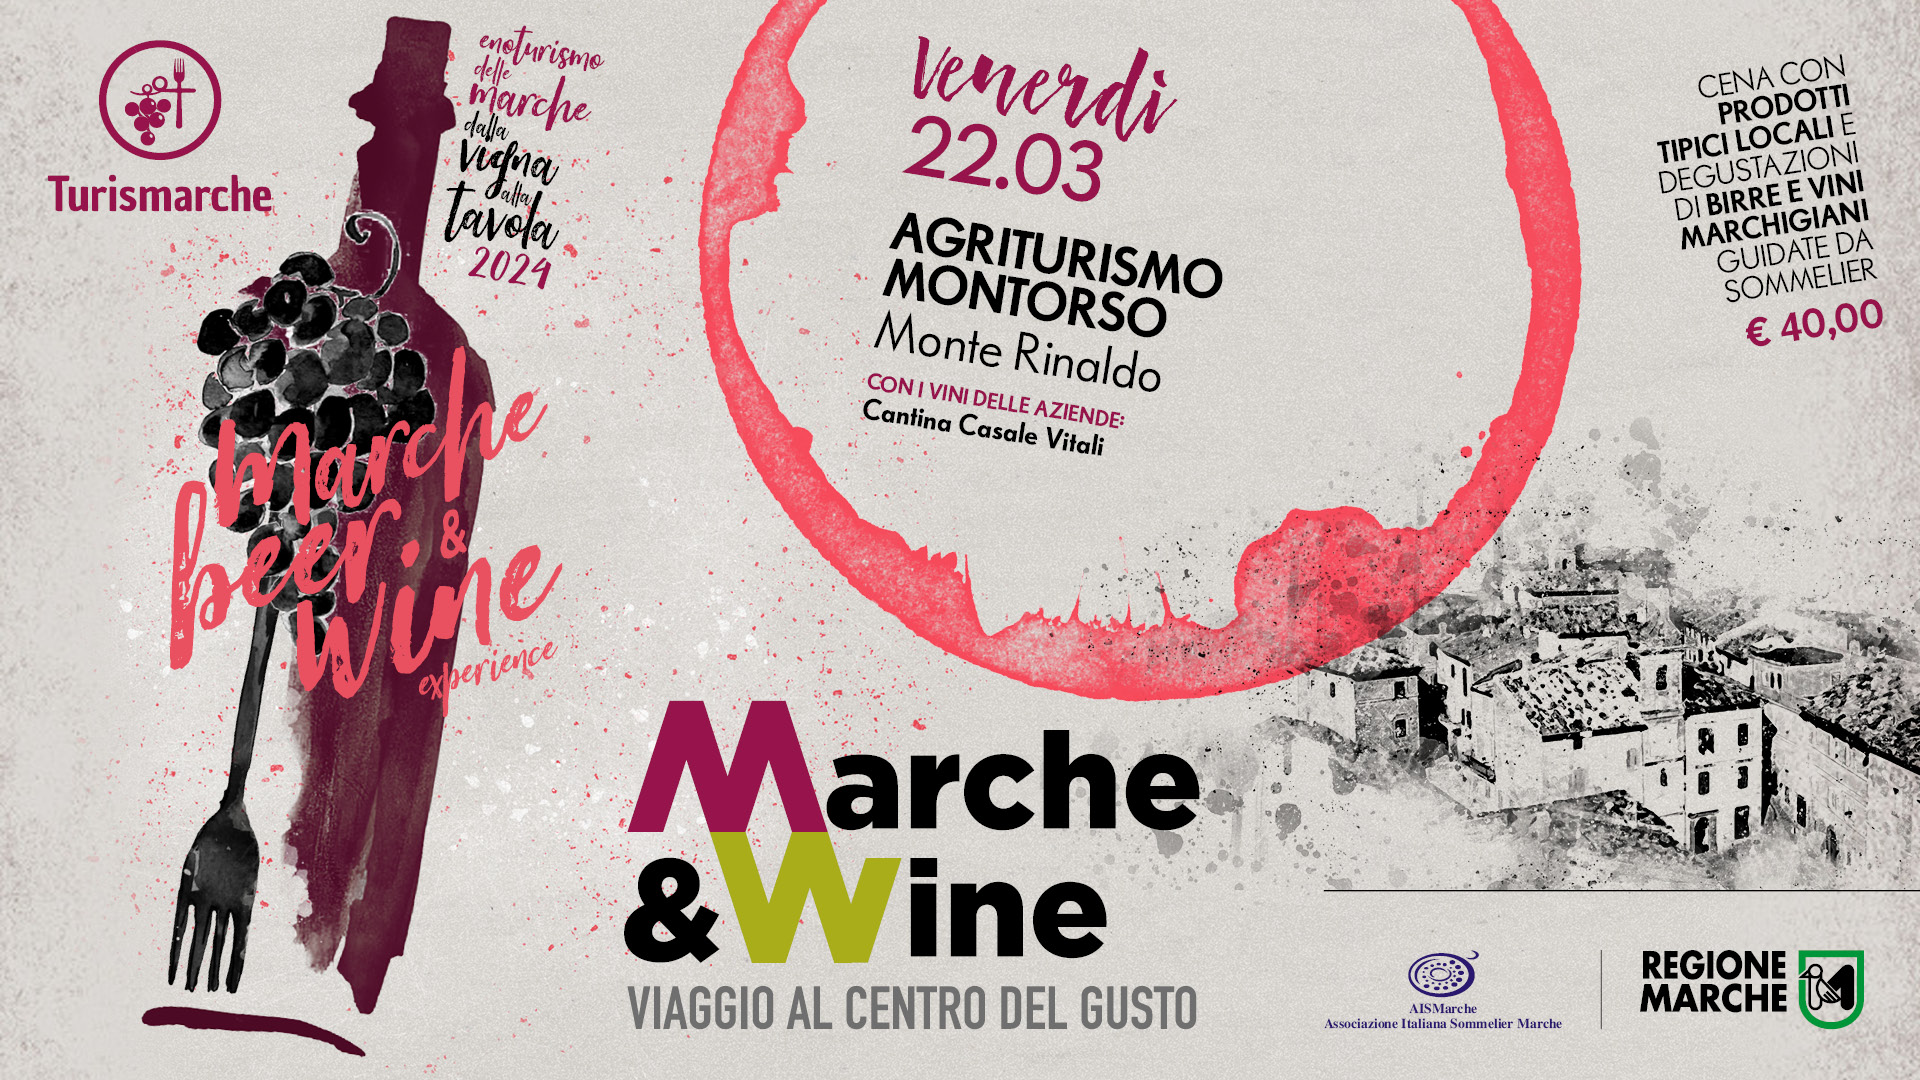 Marche Beer & Wine Experience - Agriturismo Montorso